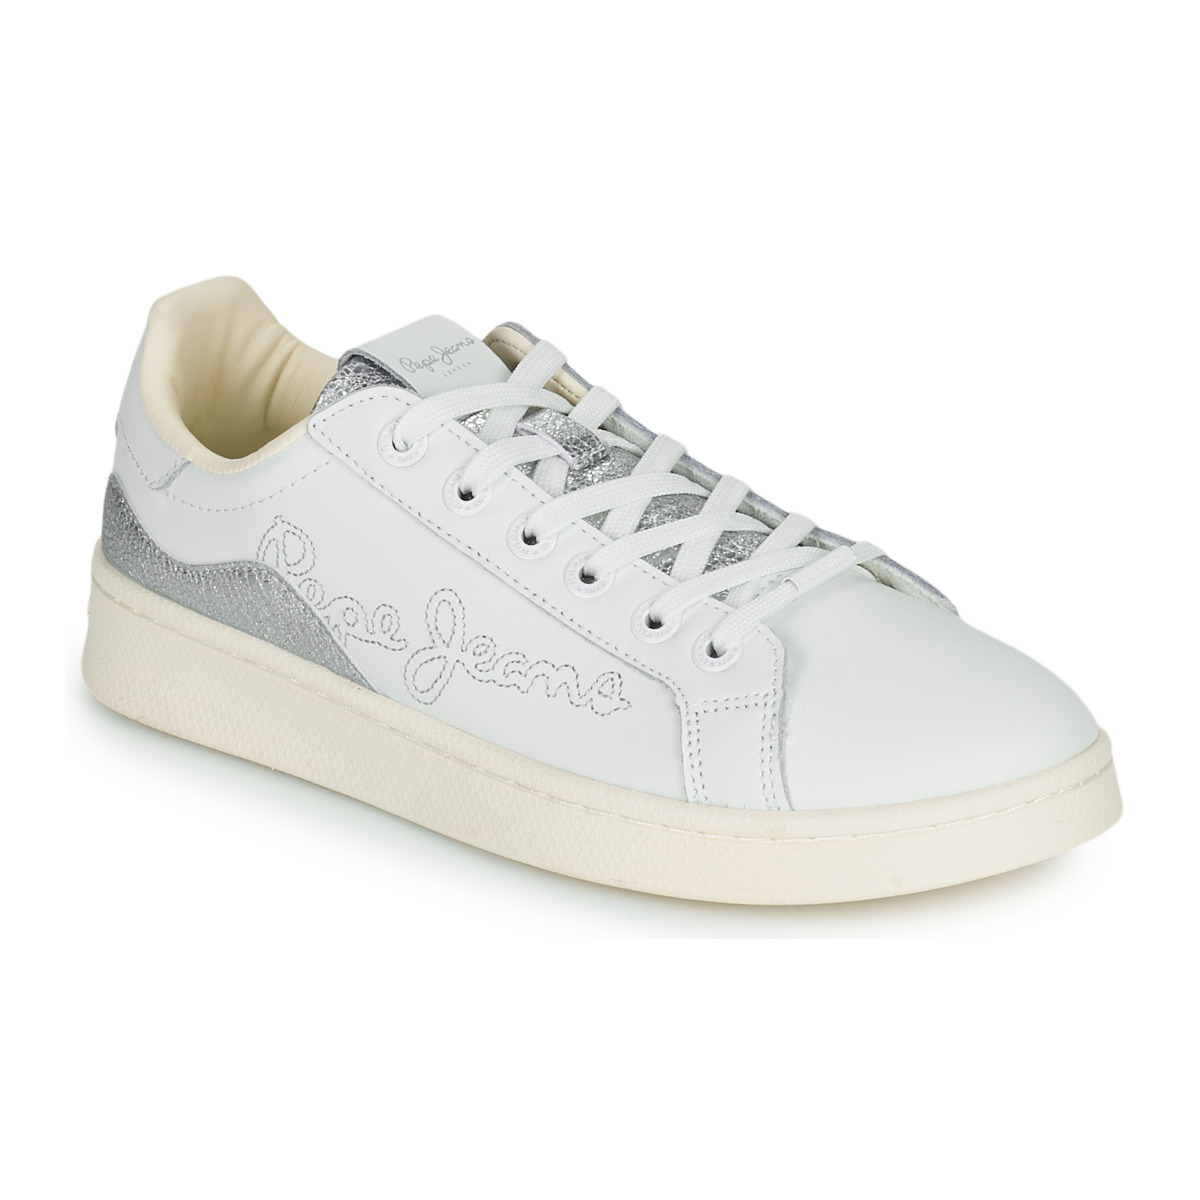 Pepe jeans  Xαμηλά Sneakers Pepe jeans MILTON MIX